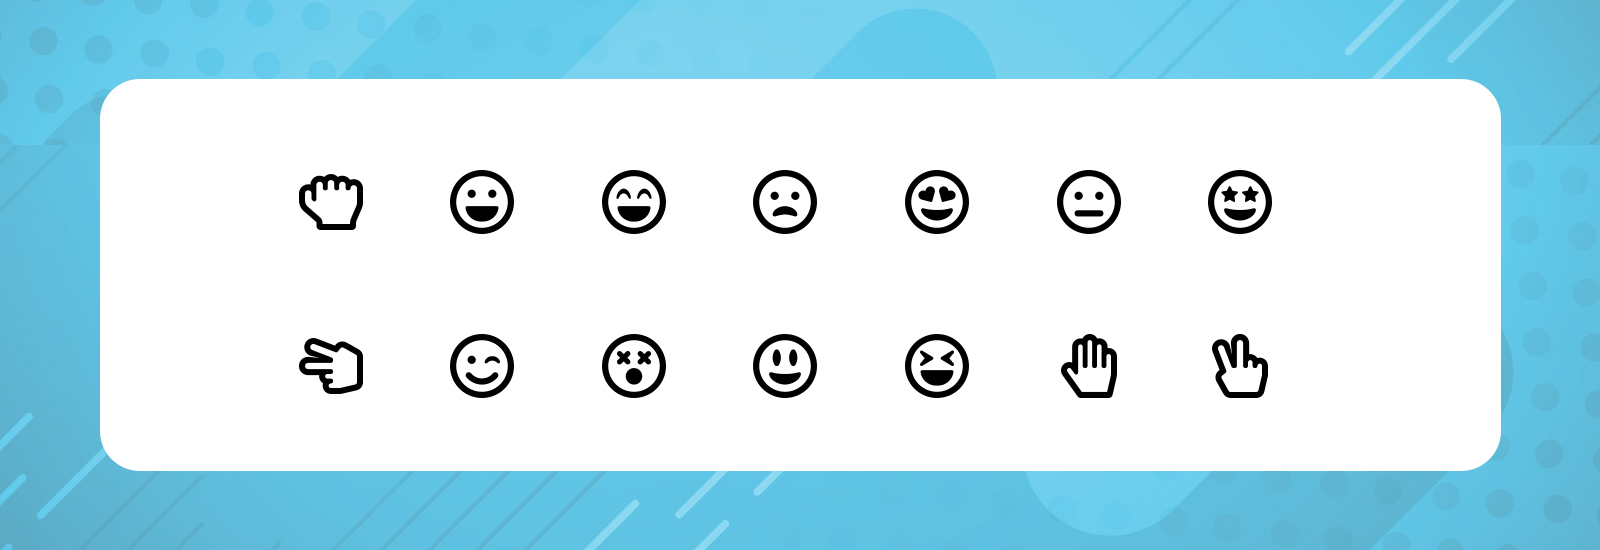 How icons increase user experience?